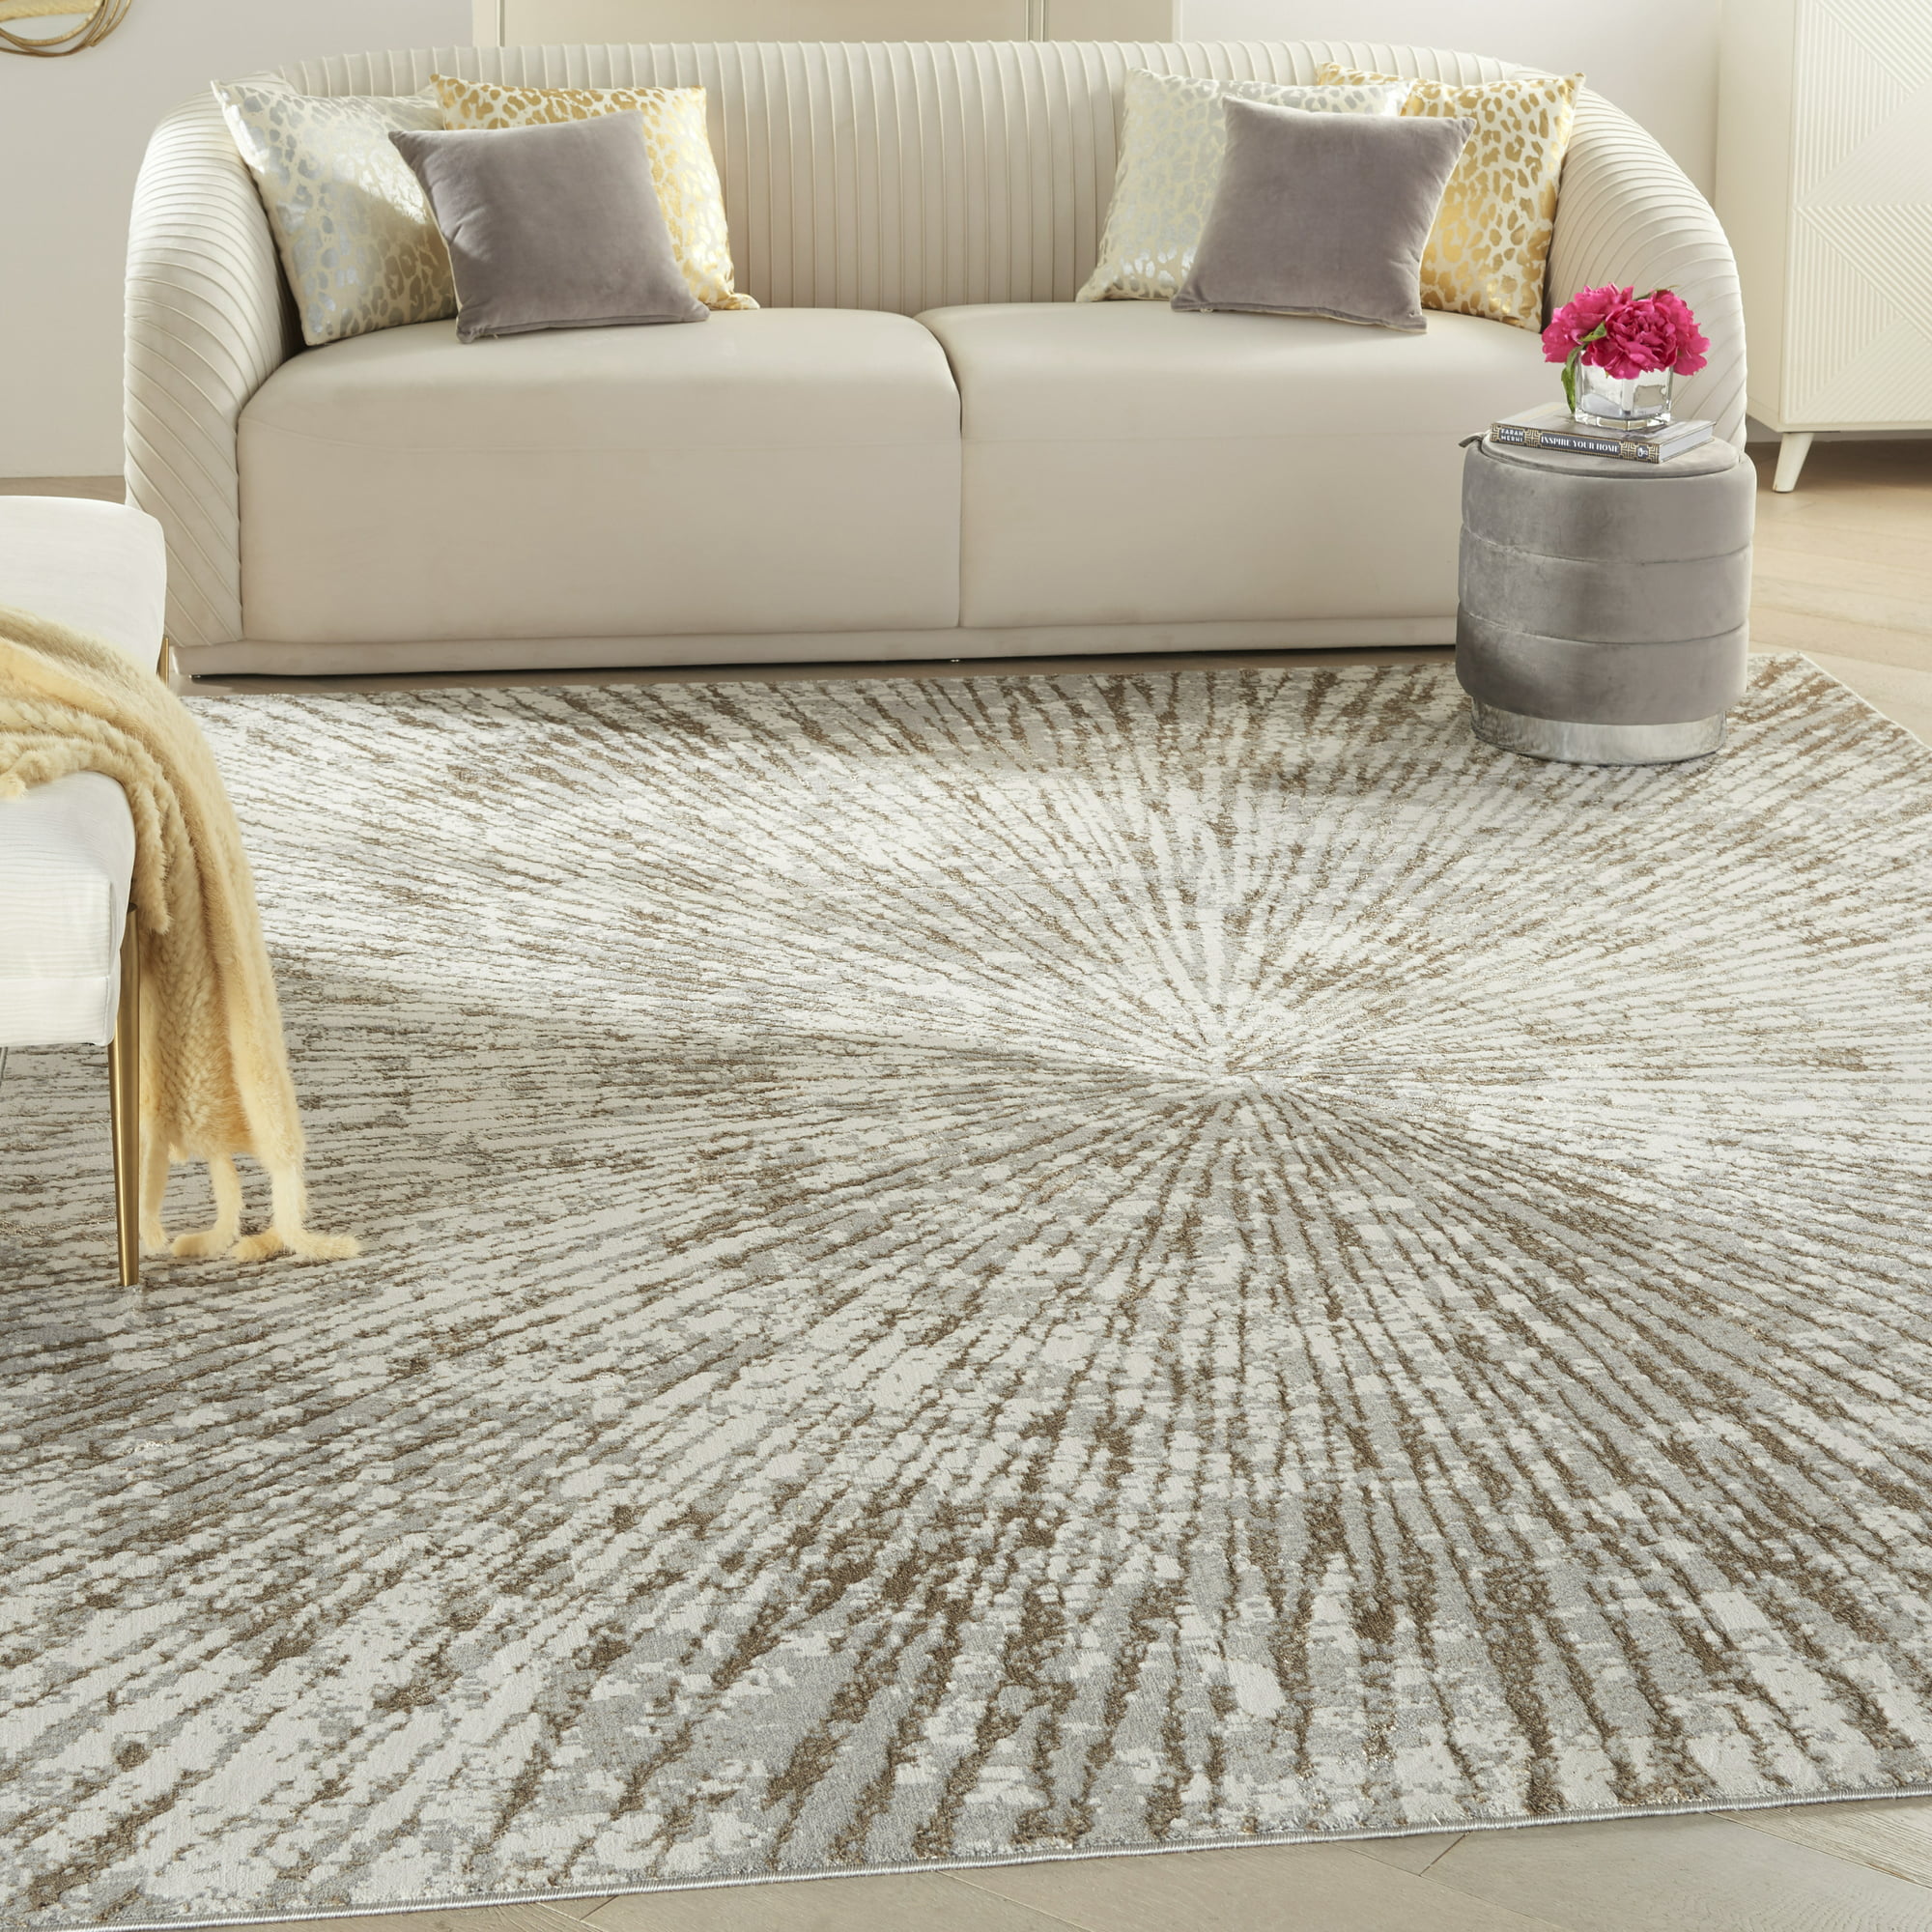 Inspire Me! Home Decor Metallic Abstract Area Rug, 108 in x 144 in ...